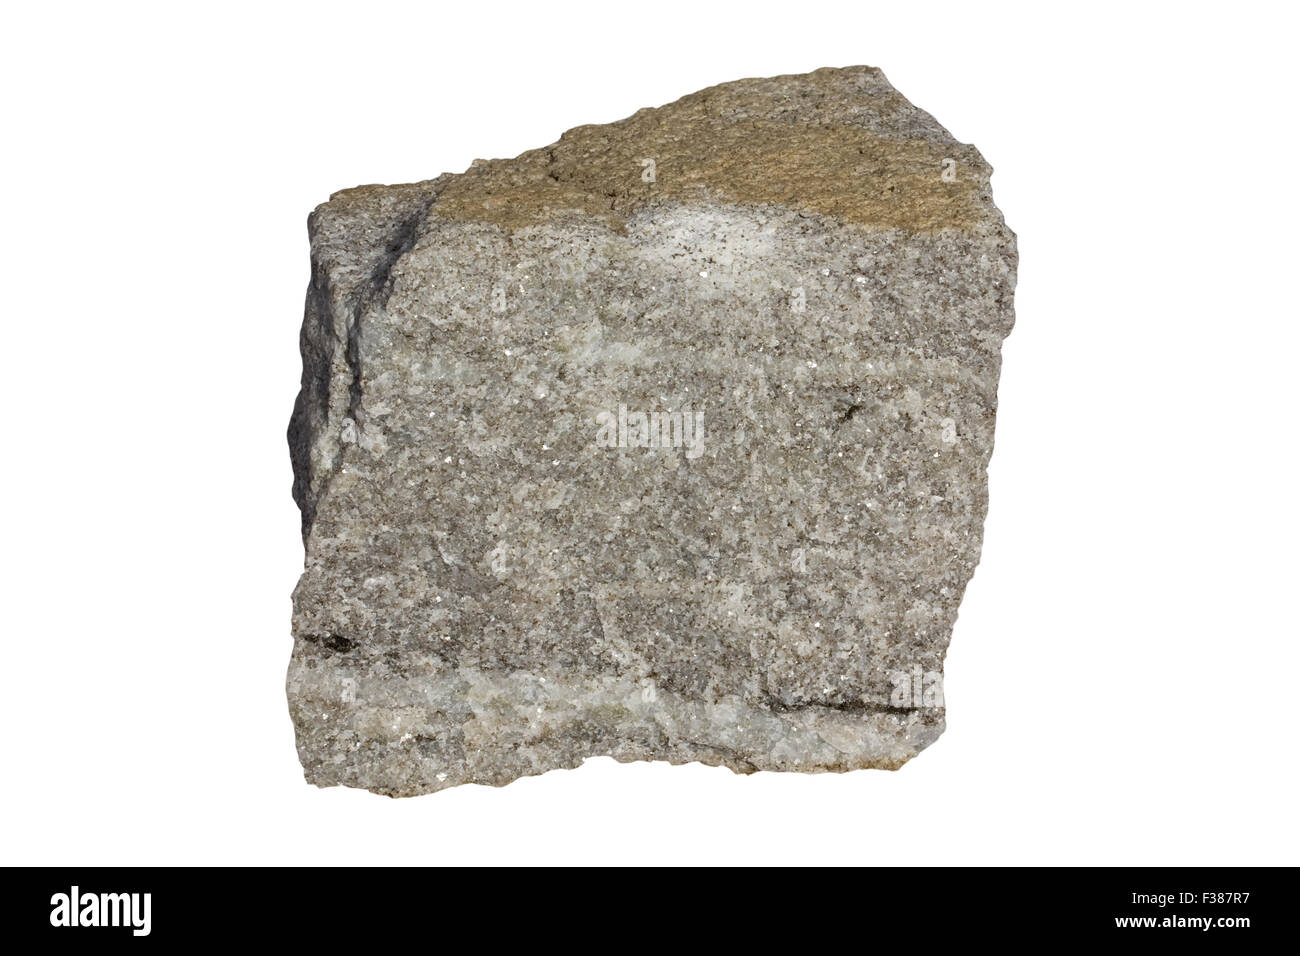 Dolomite marble (marble composed of mineral dolomite) Stock Photo